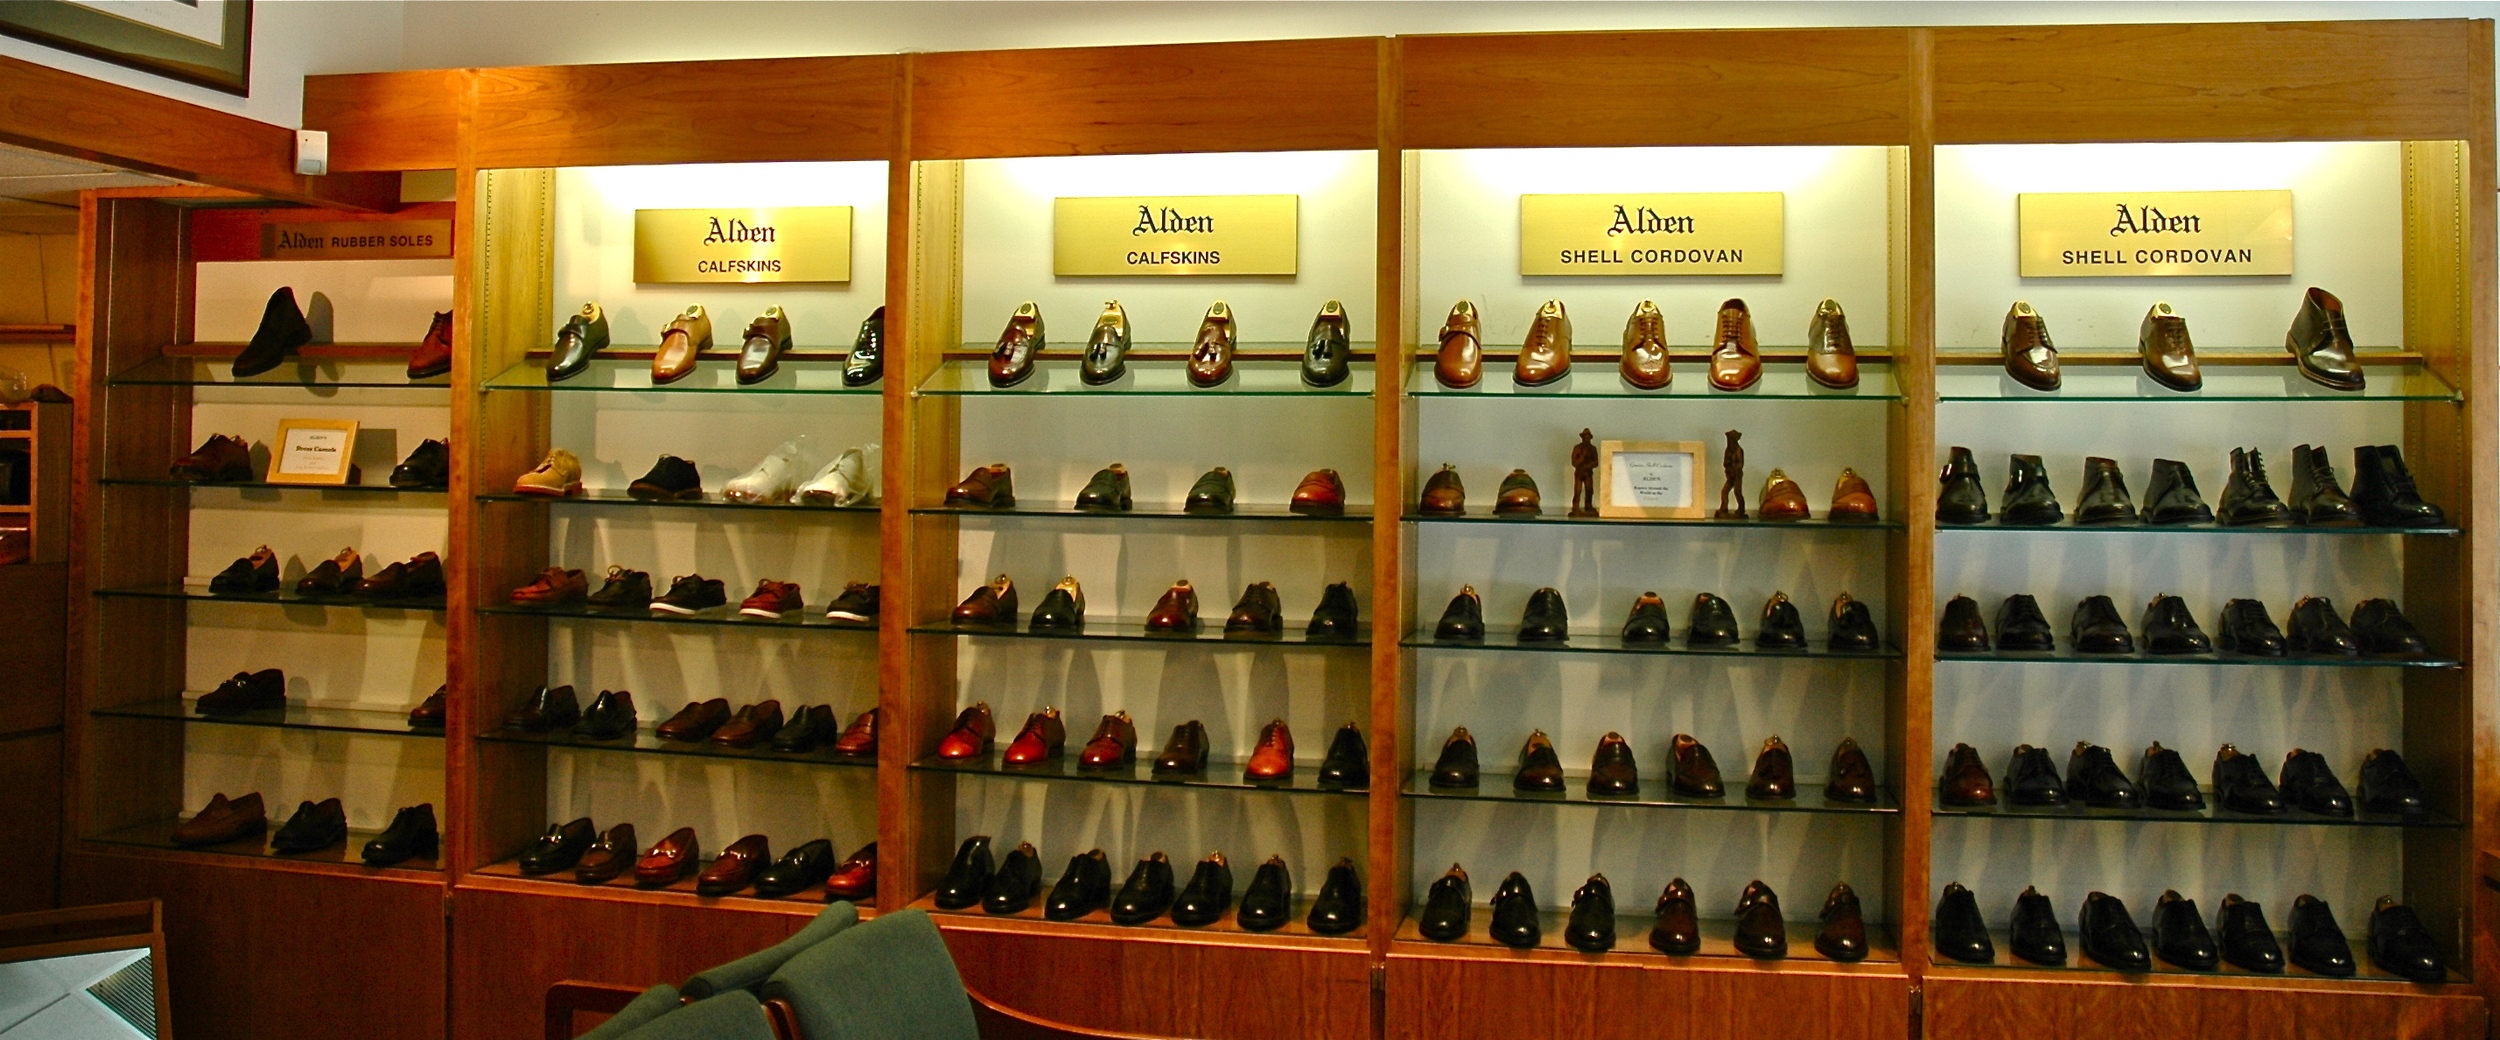 assortment of leather shoes